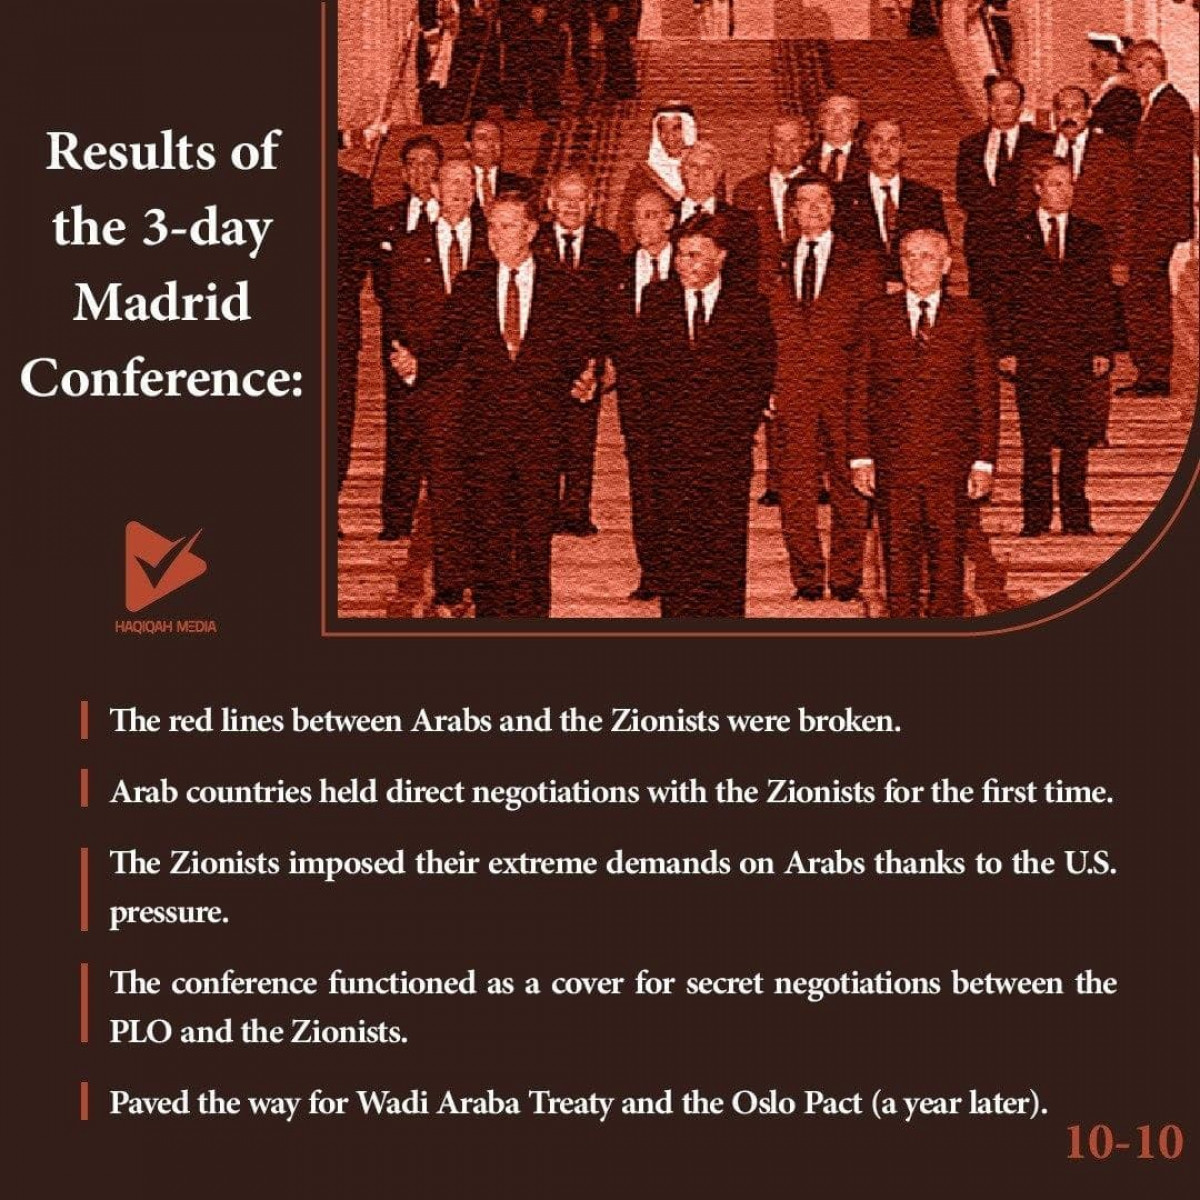 Results of the 3-day Madrid Conference